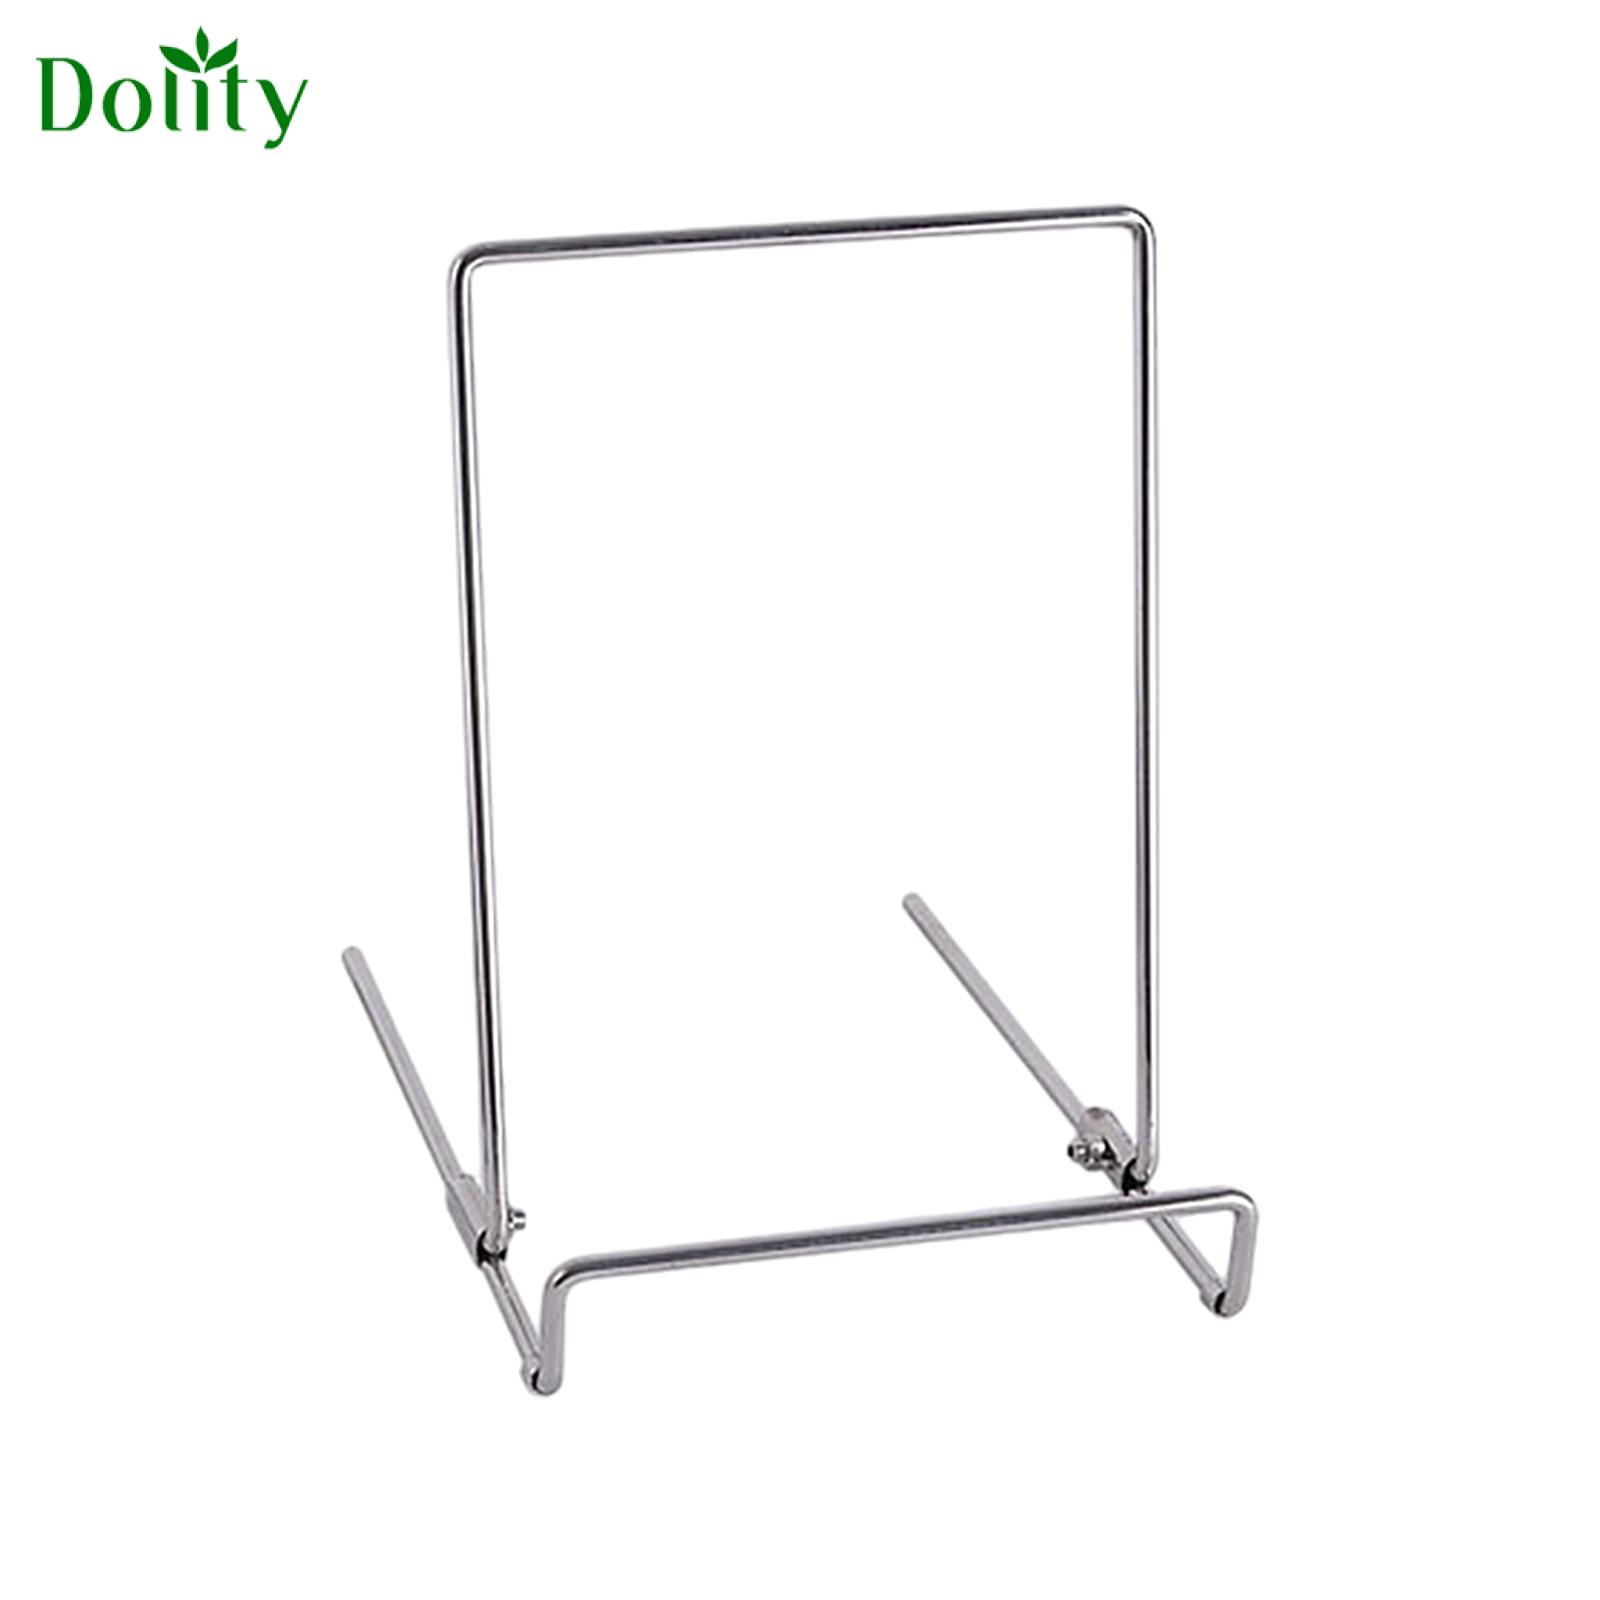 Dolity Shirts Display Stand Shirts Display Rack Simple Shirt Support